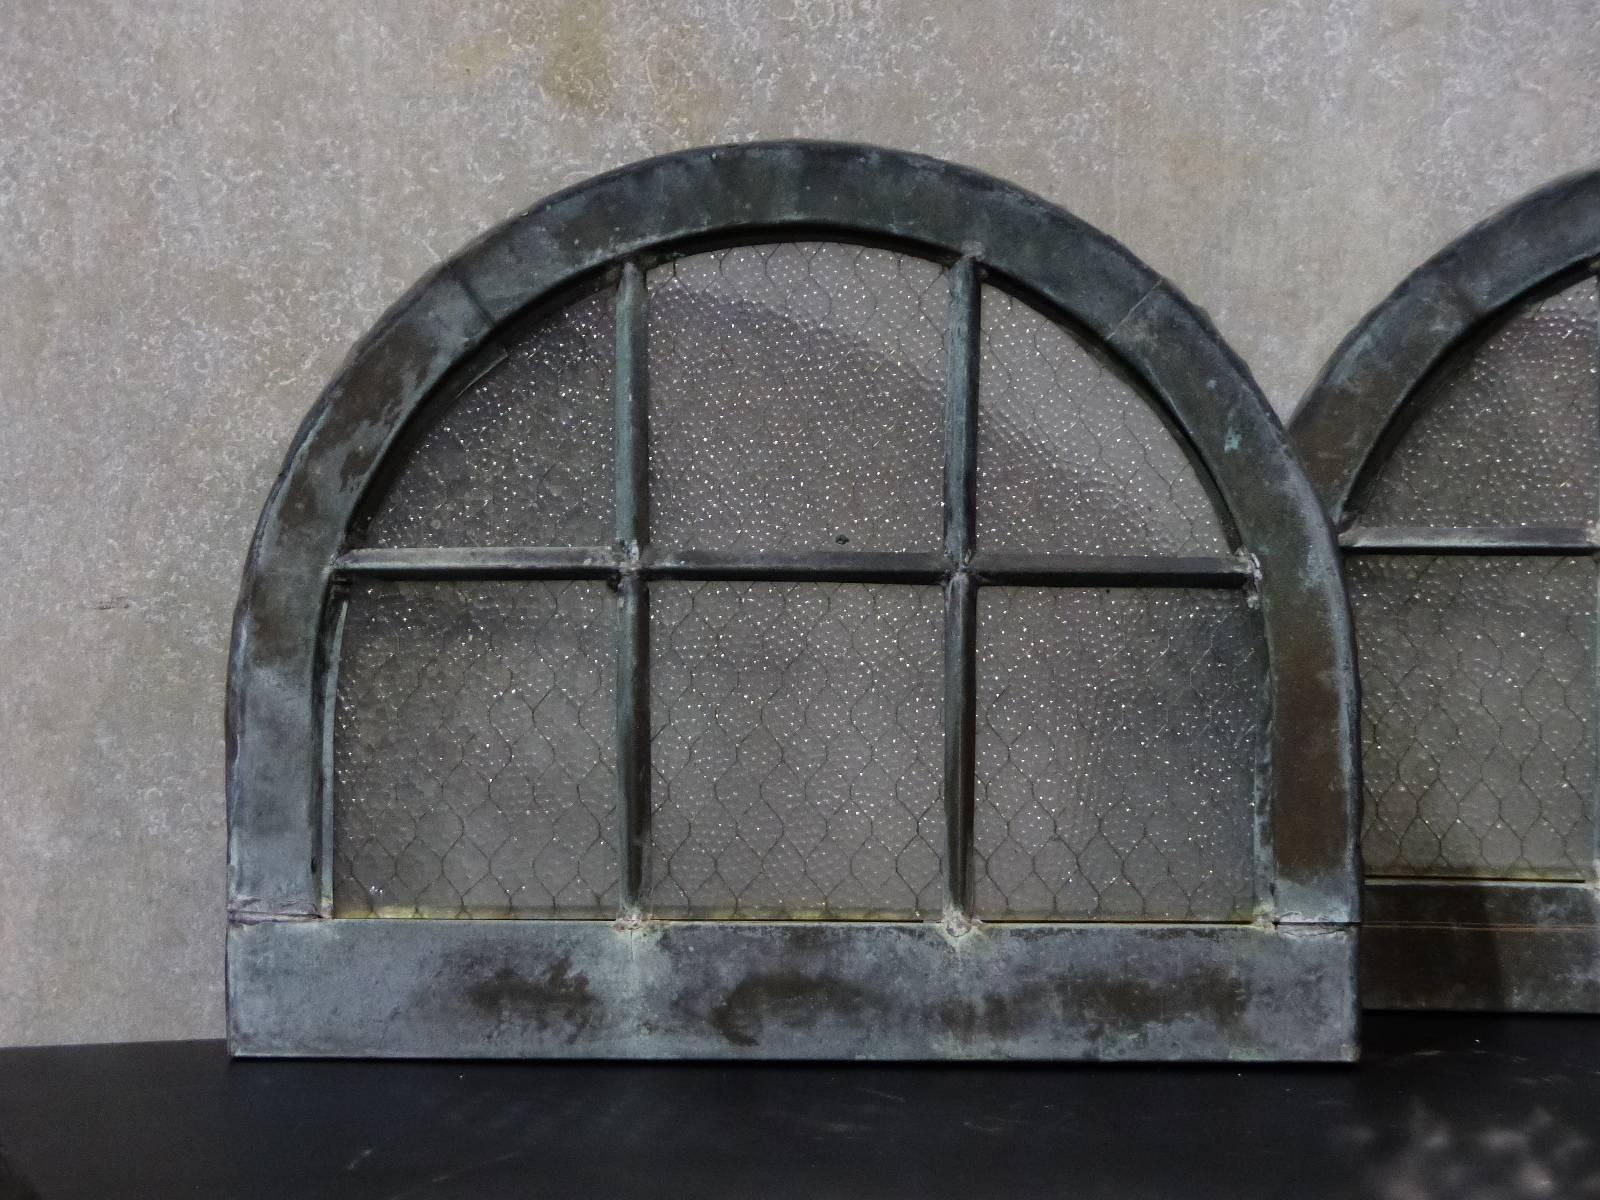 Pair of small arched glass window panels with original safety glass , salvaged from The Greystone Institution in New jersey.

Window frames are copper cladded . c 1890